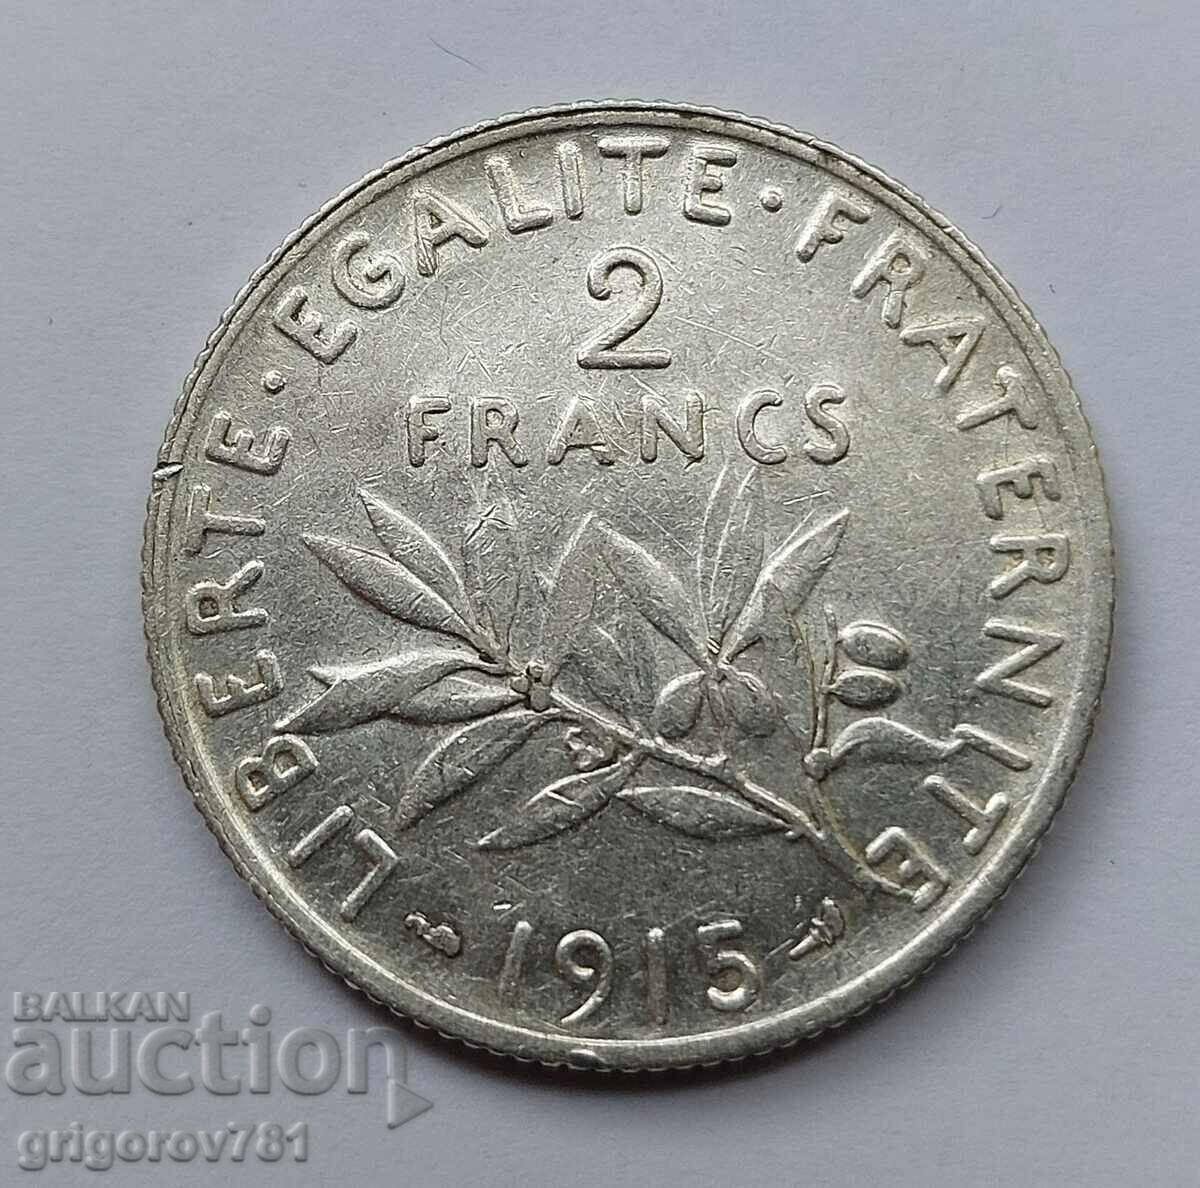 2 Francs Silver France 1898 - Silver Coin #30